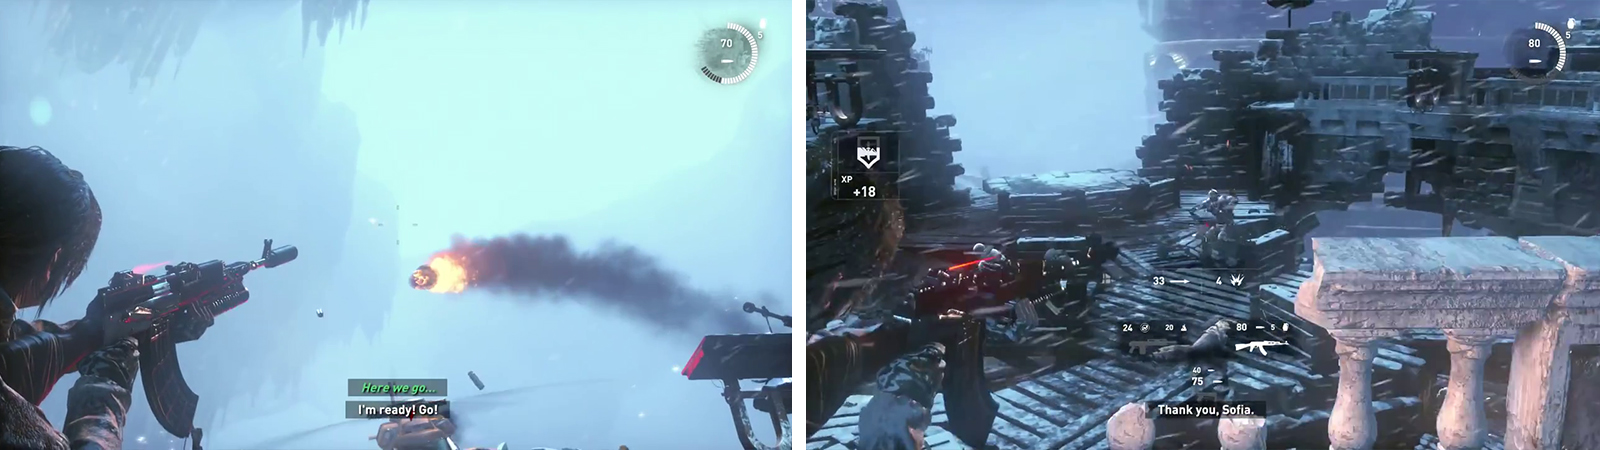 Signal trebuchet fire and shoot the projectile (left) to damage the helicopter. Use the raised areas on the sides of the area to get a vantage point over enemies (right).